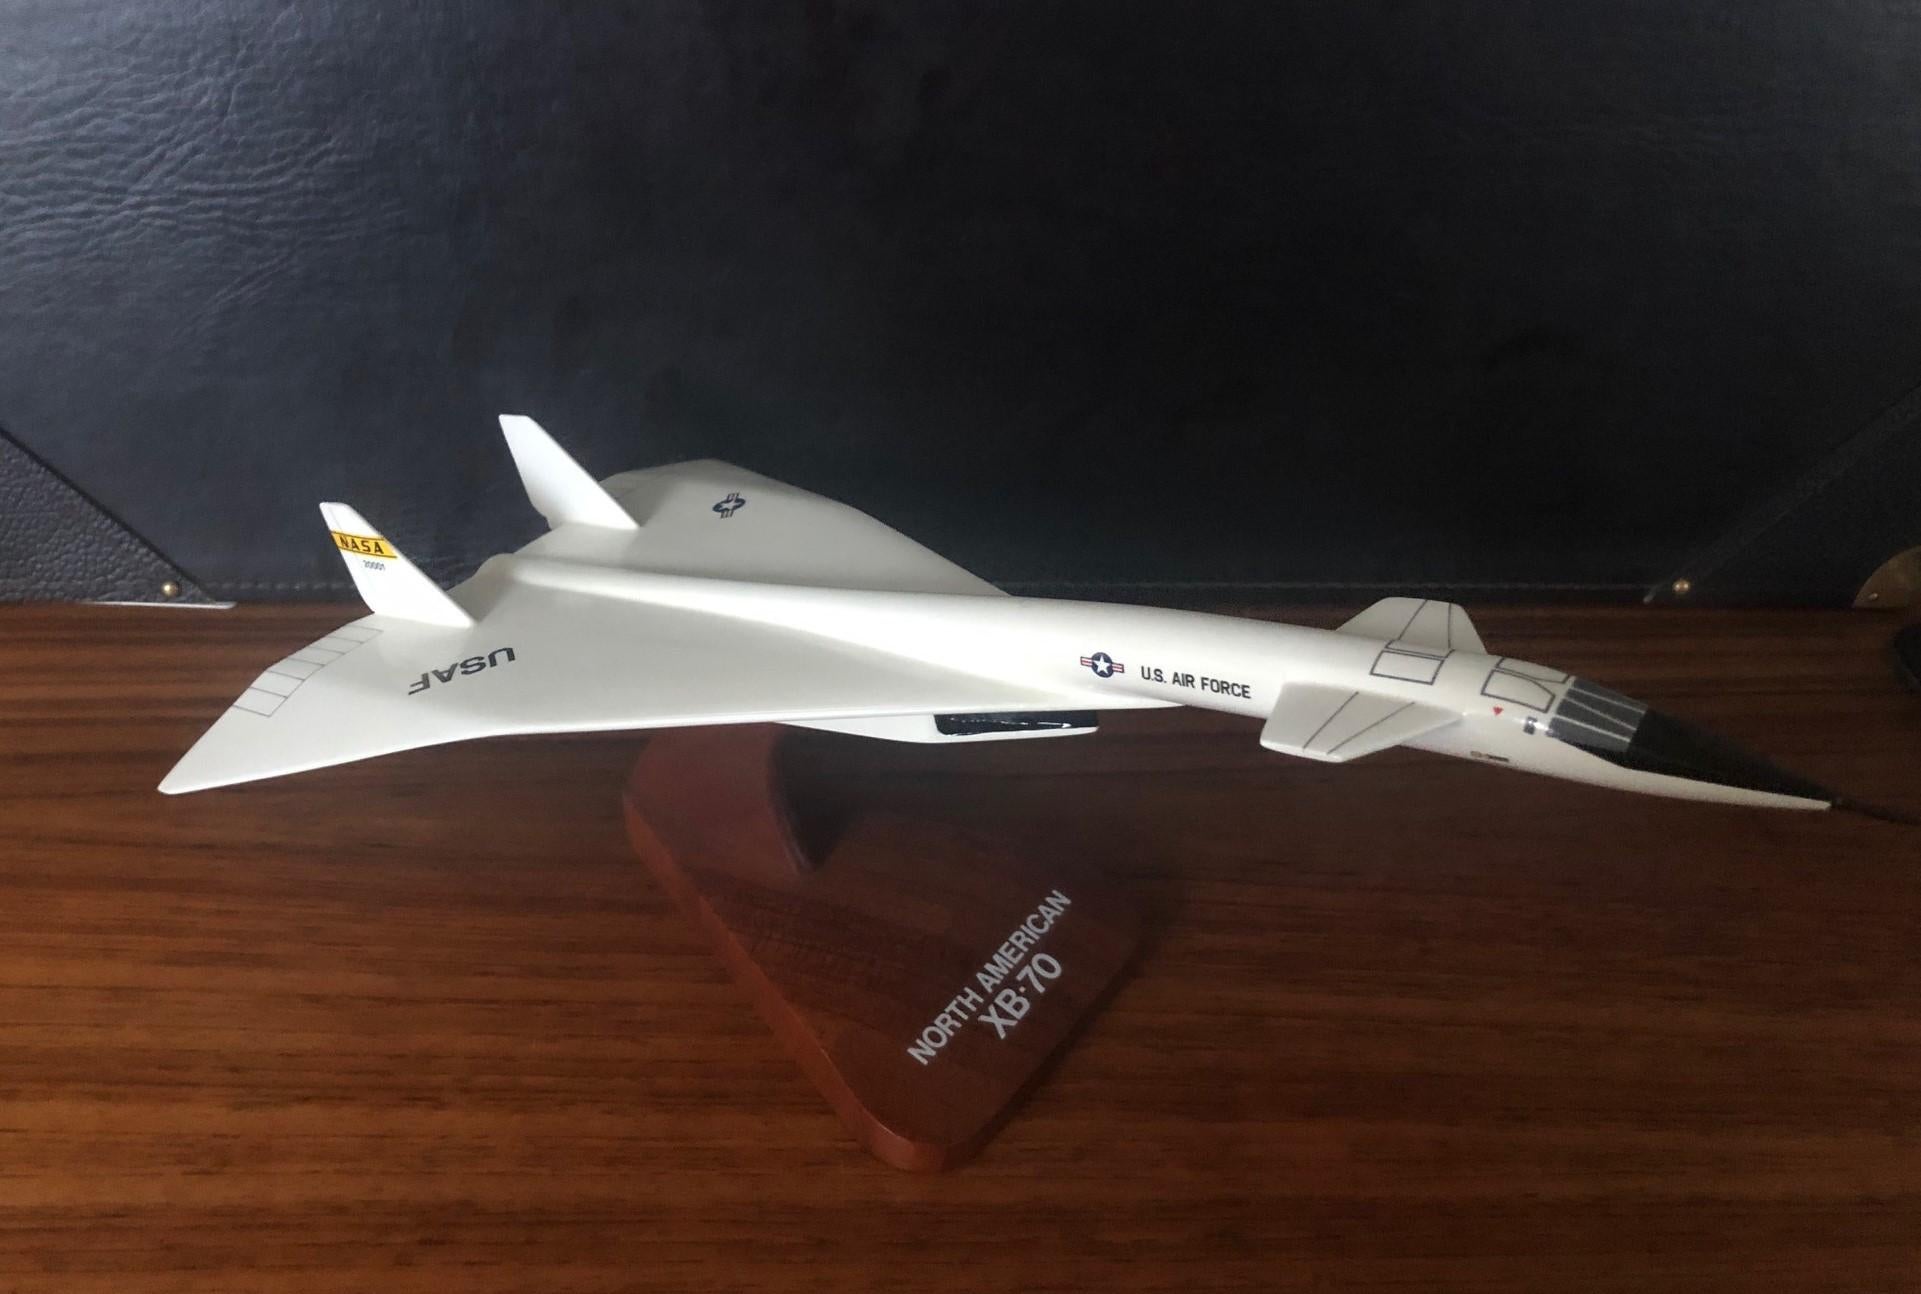 Philippine U.S. Air Force NASA XB-70 Valkyrie Airplane / Bomber Contractor Desk Model